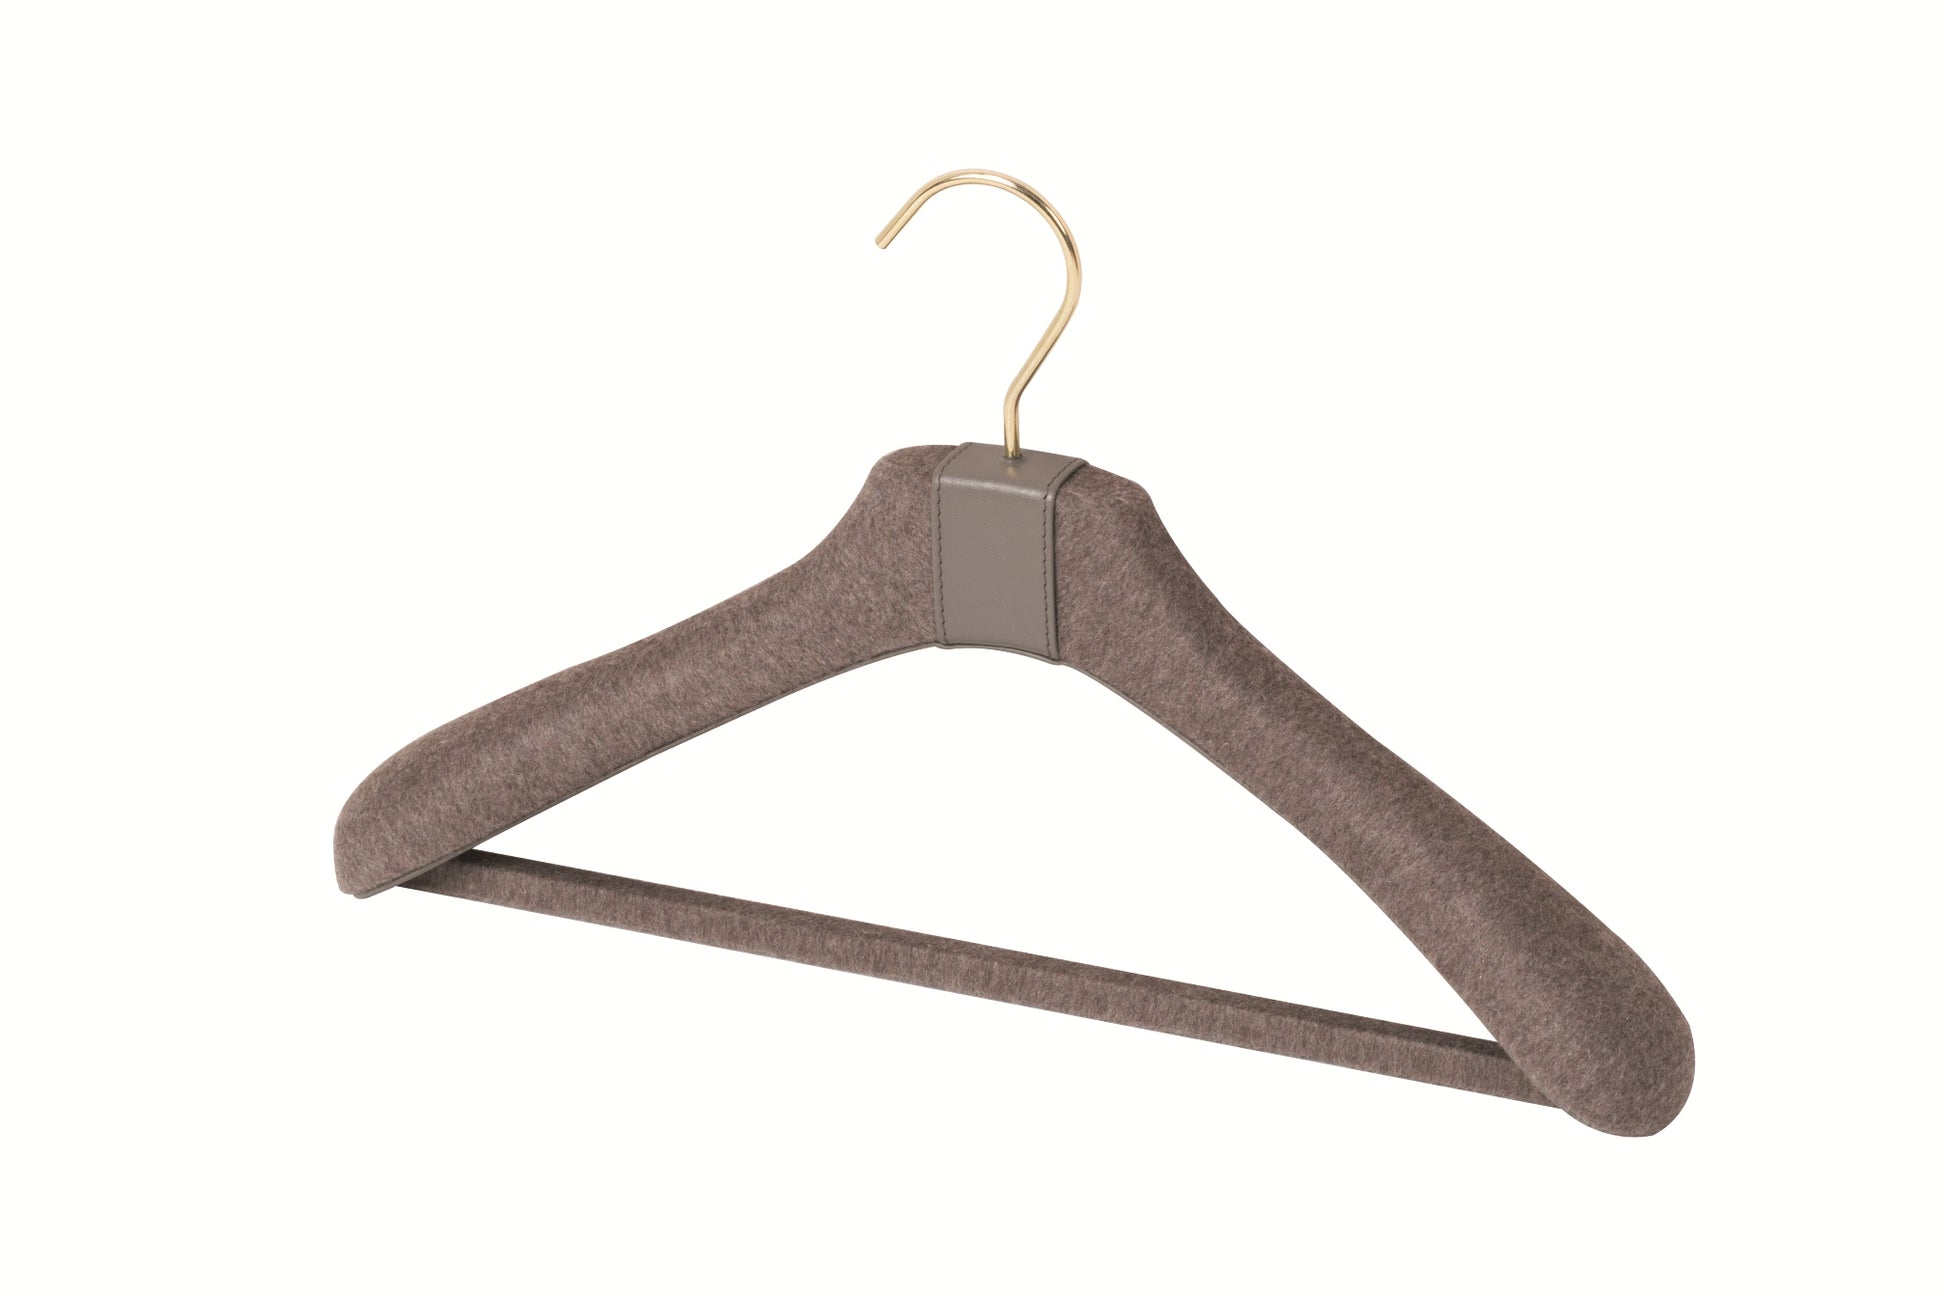 Giobagnara Brunello Clothes Leather & Cashmere Covered Wood Hanger | Stylish Wardrobe Accessories, Elegant Closet Organization & Gift Items | 2Jour Concierge, #1 luxury high-end gift & lifestyle shop